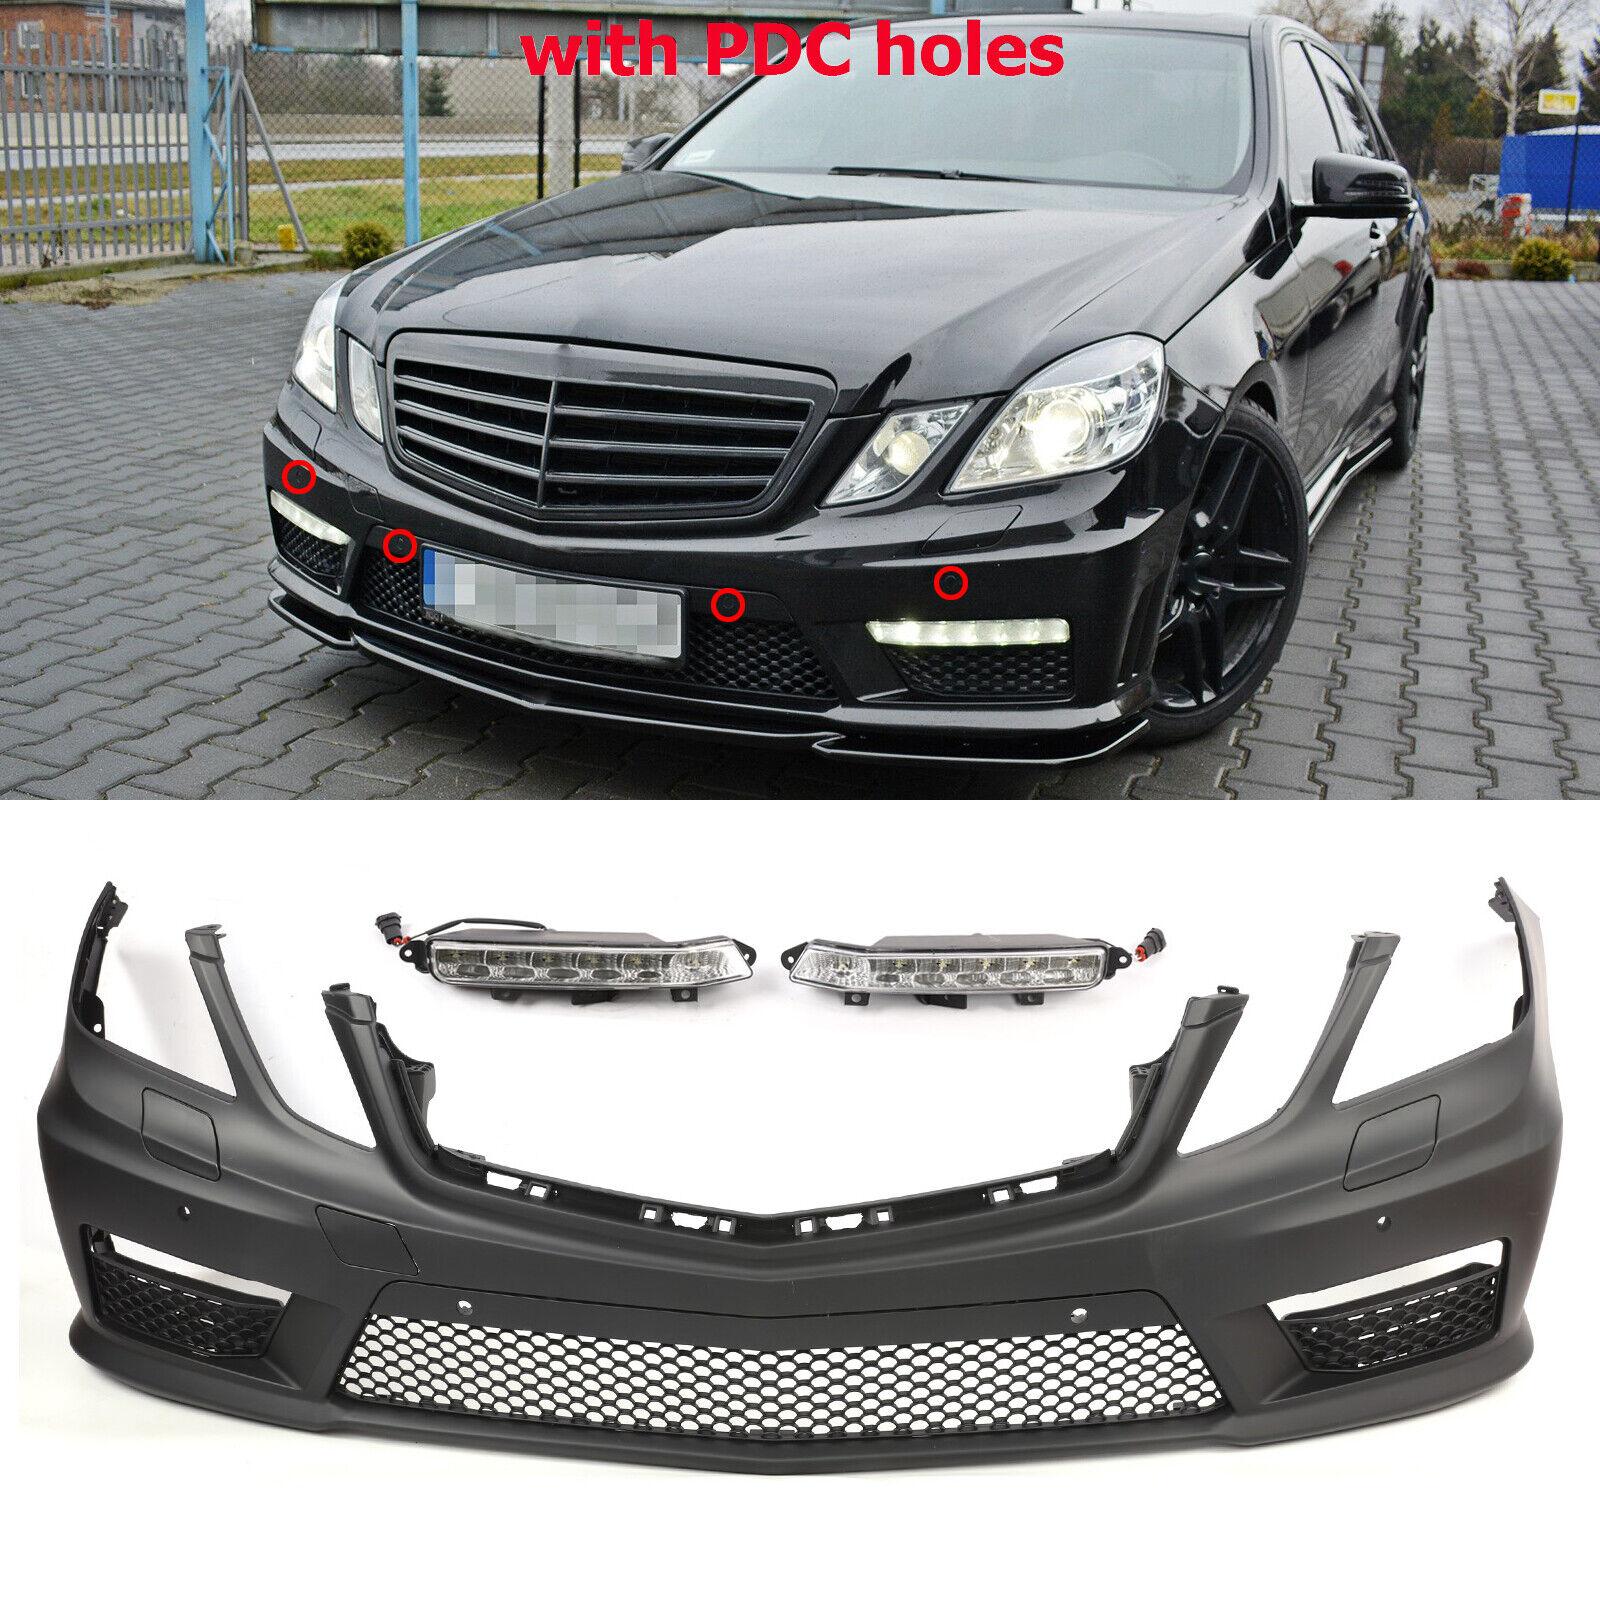 Fits 10-13 Mercedes E Class W212 AMG Style Front Bumper Cover with LED DRL W/PDC